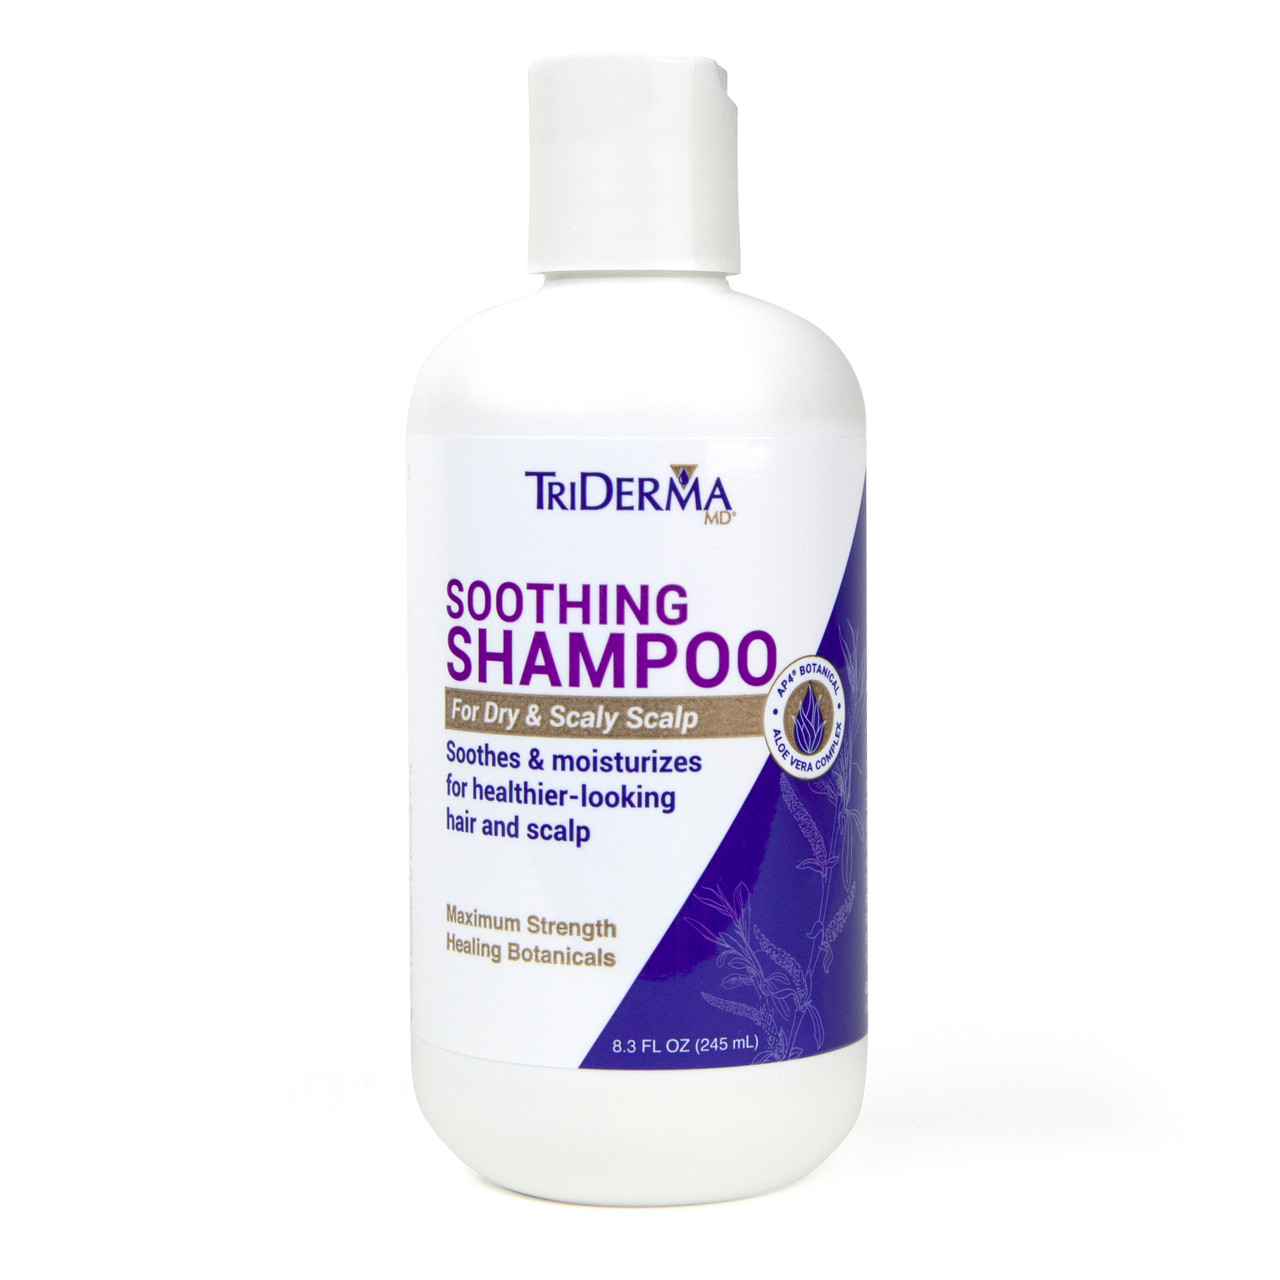 TriDerma Soothing Shampoo For Dry & Scaly Scalp